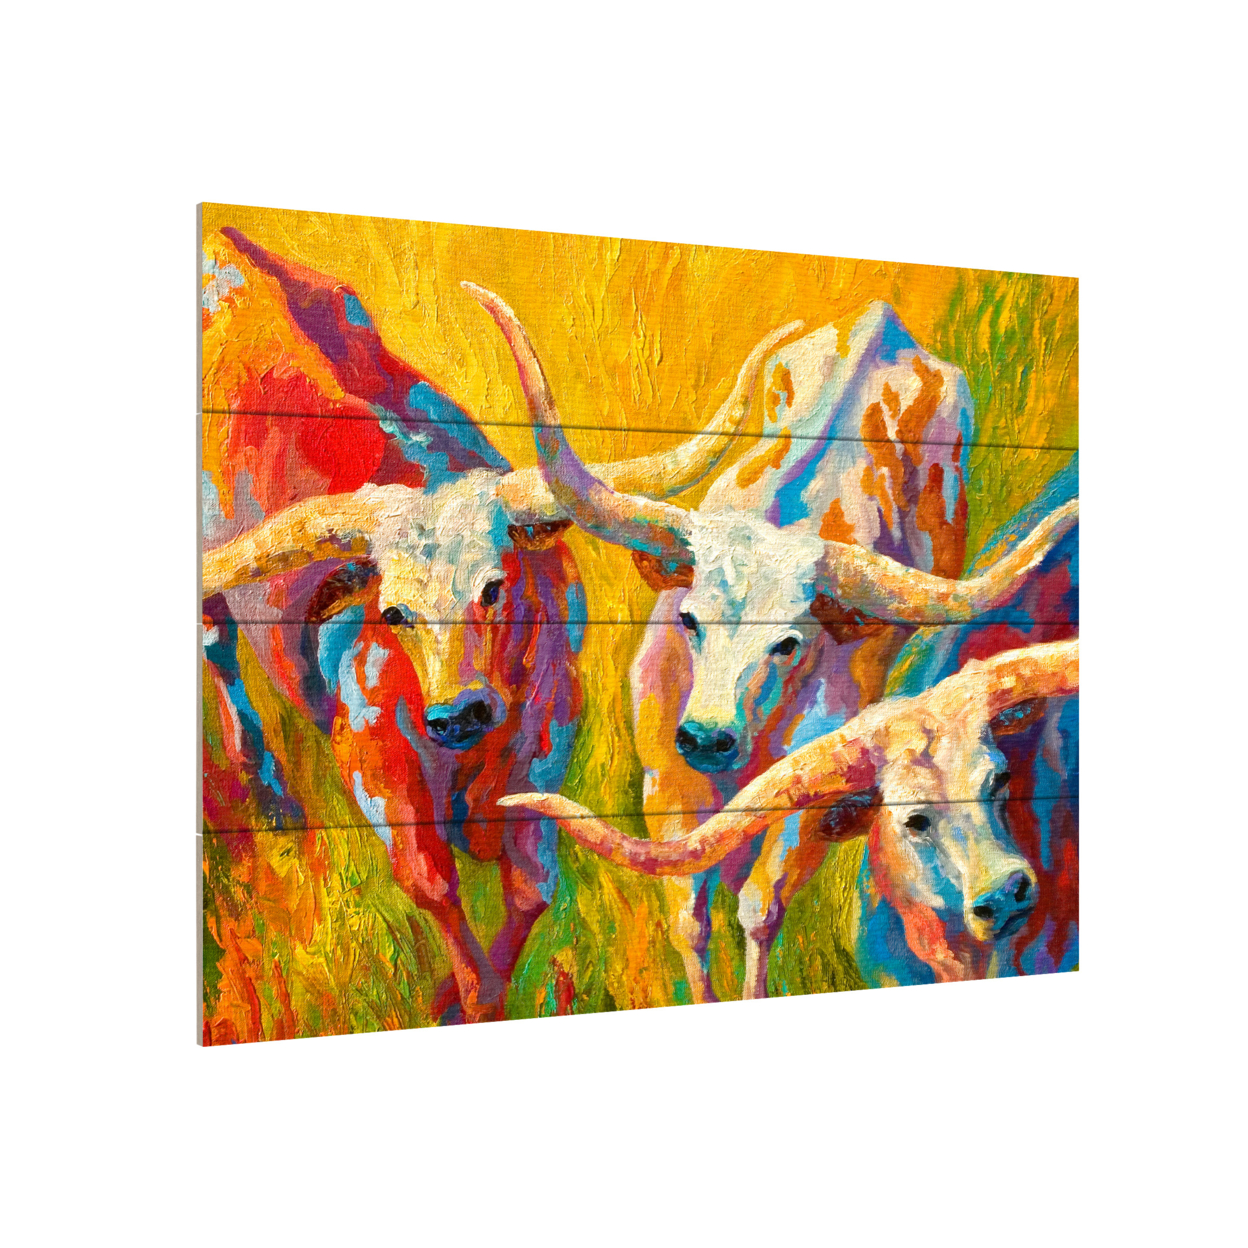 Wall Art 12 X 16 Inches Titled Dance Of The Longhorns Ready To Hang Printed On Wooden Planks